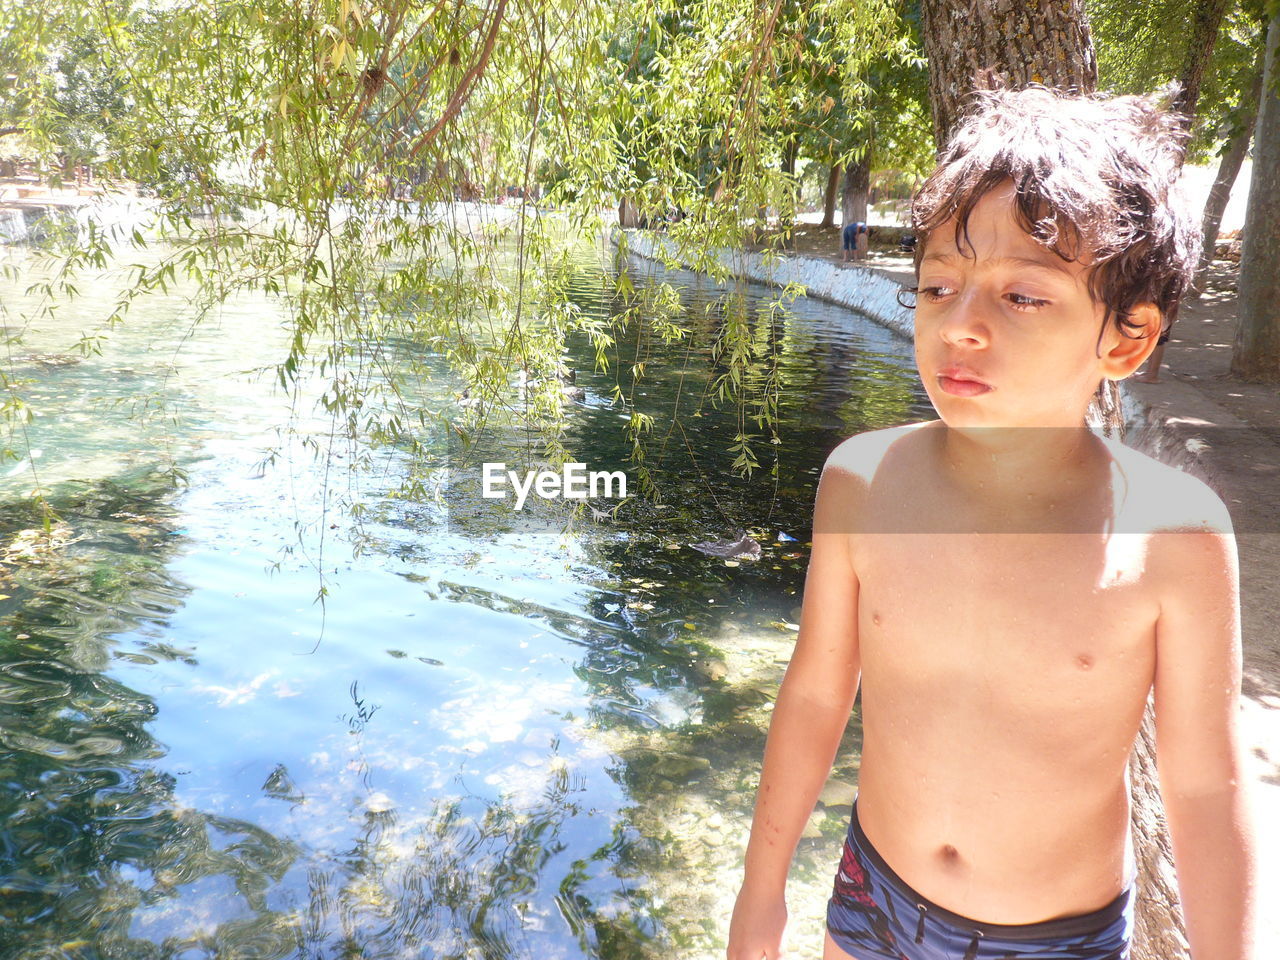 Cute shirtless boy standing against pond